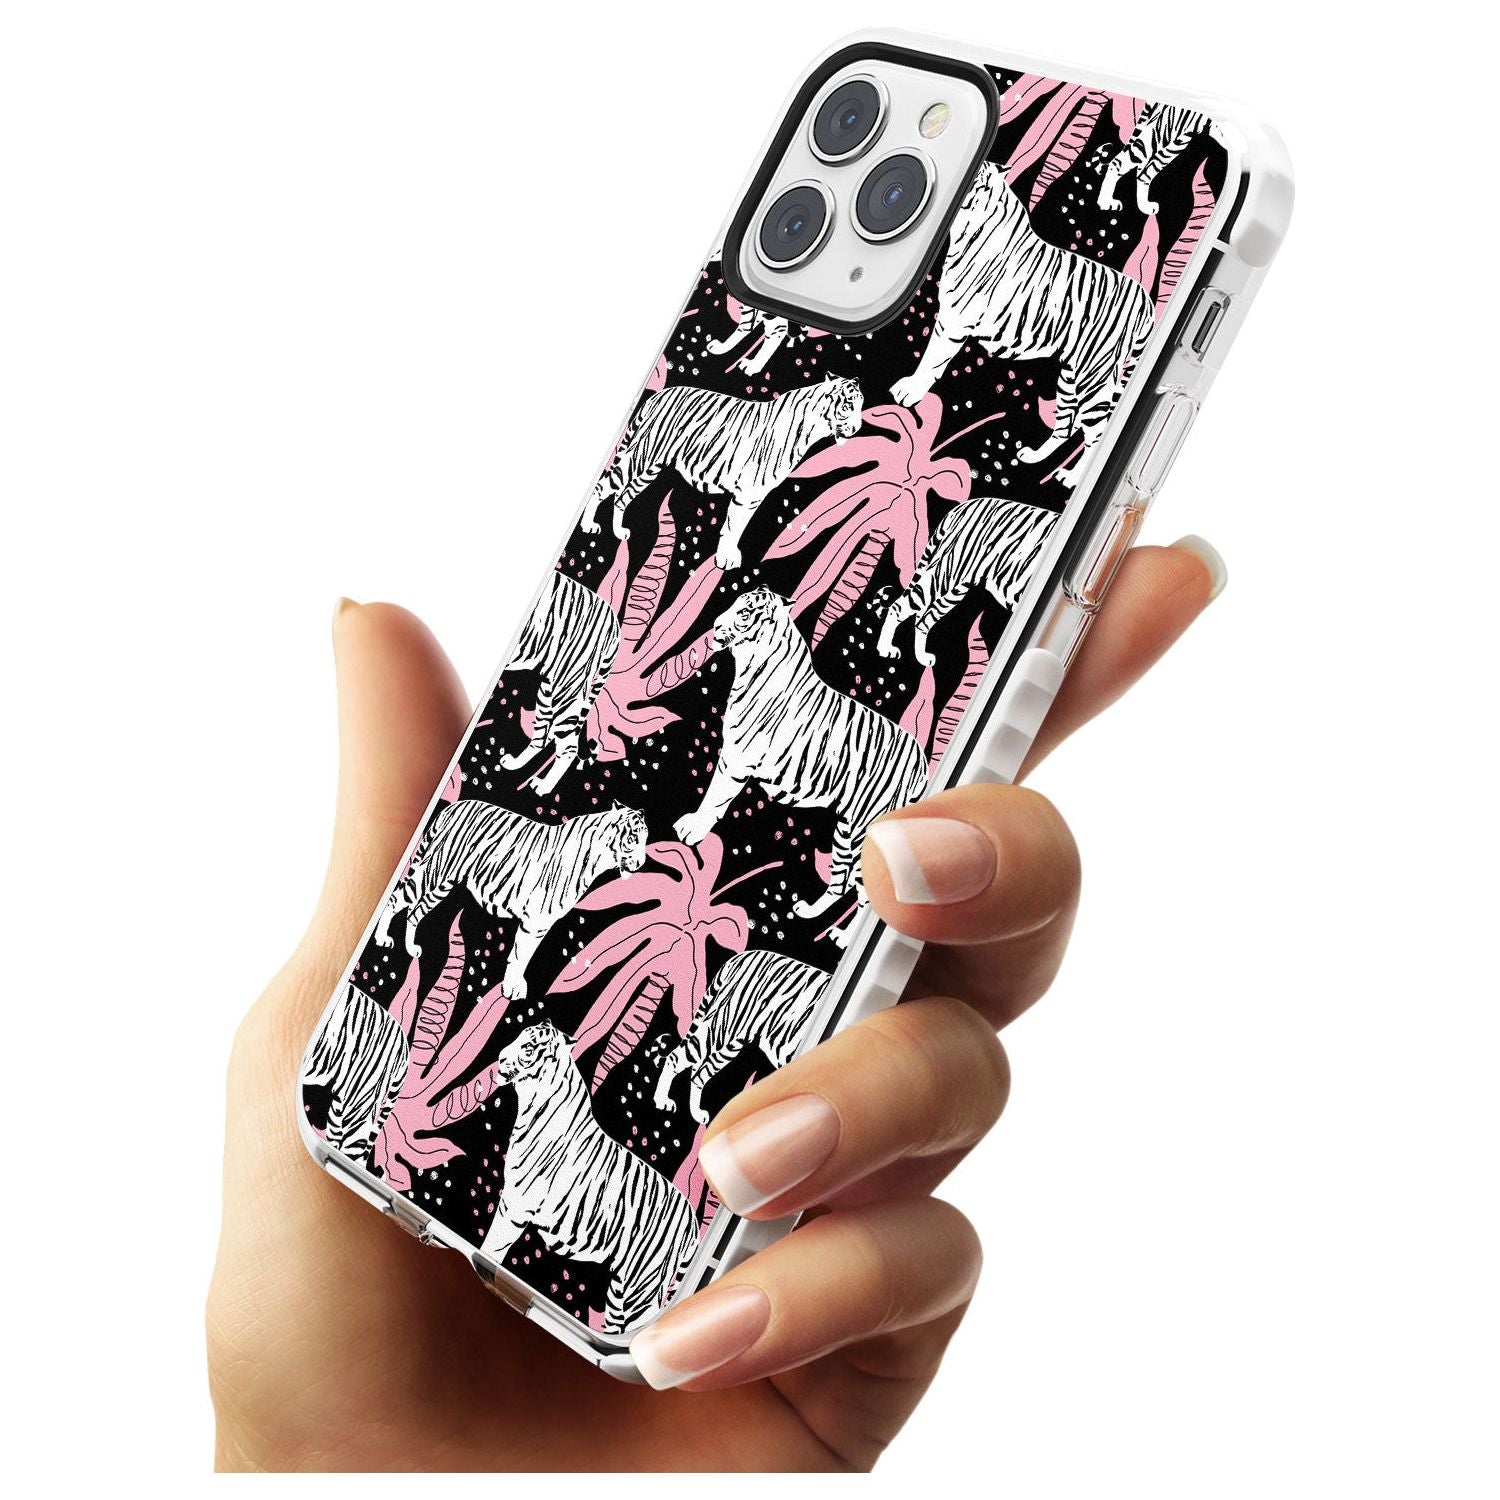 White Tigers on Black Pattern Impact Phone Case for iPhone 11 Pro Max